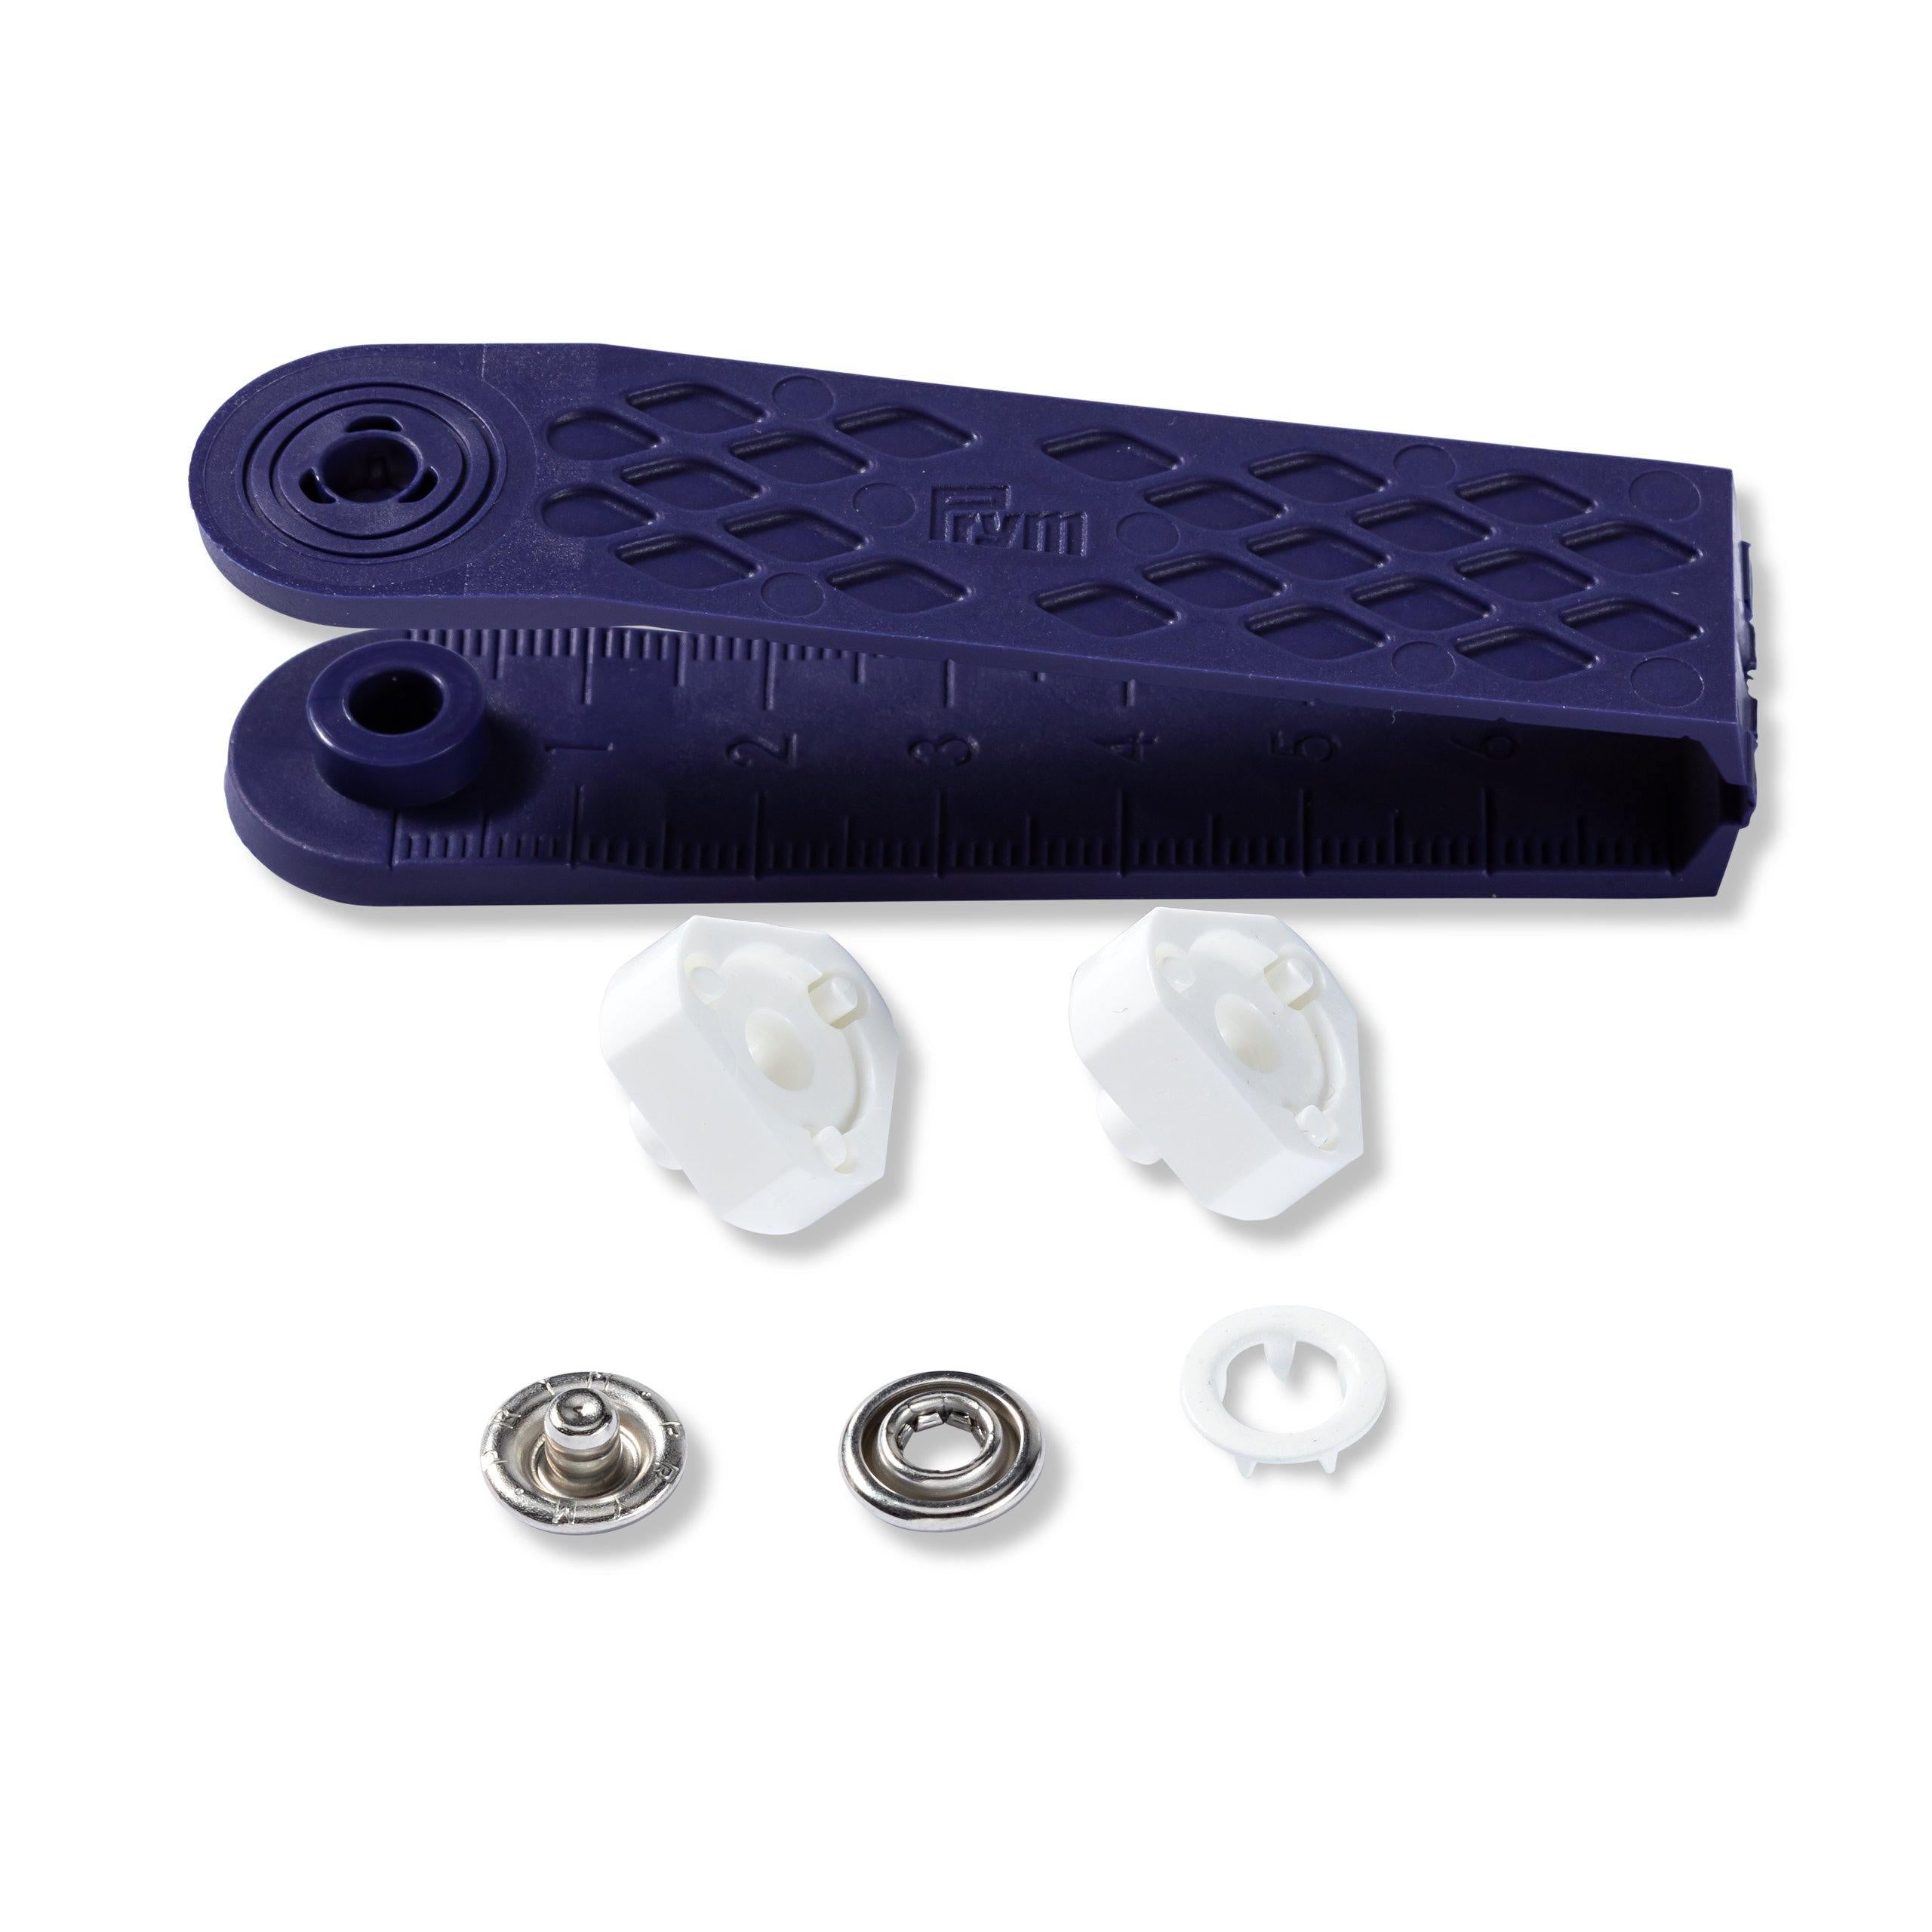 Non-sew 10mm Press Fasteners for Jersey (White) and Processing Tool Set-Accessories-Jelly Fabrics